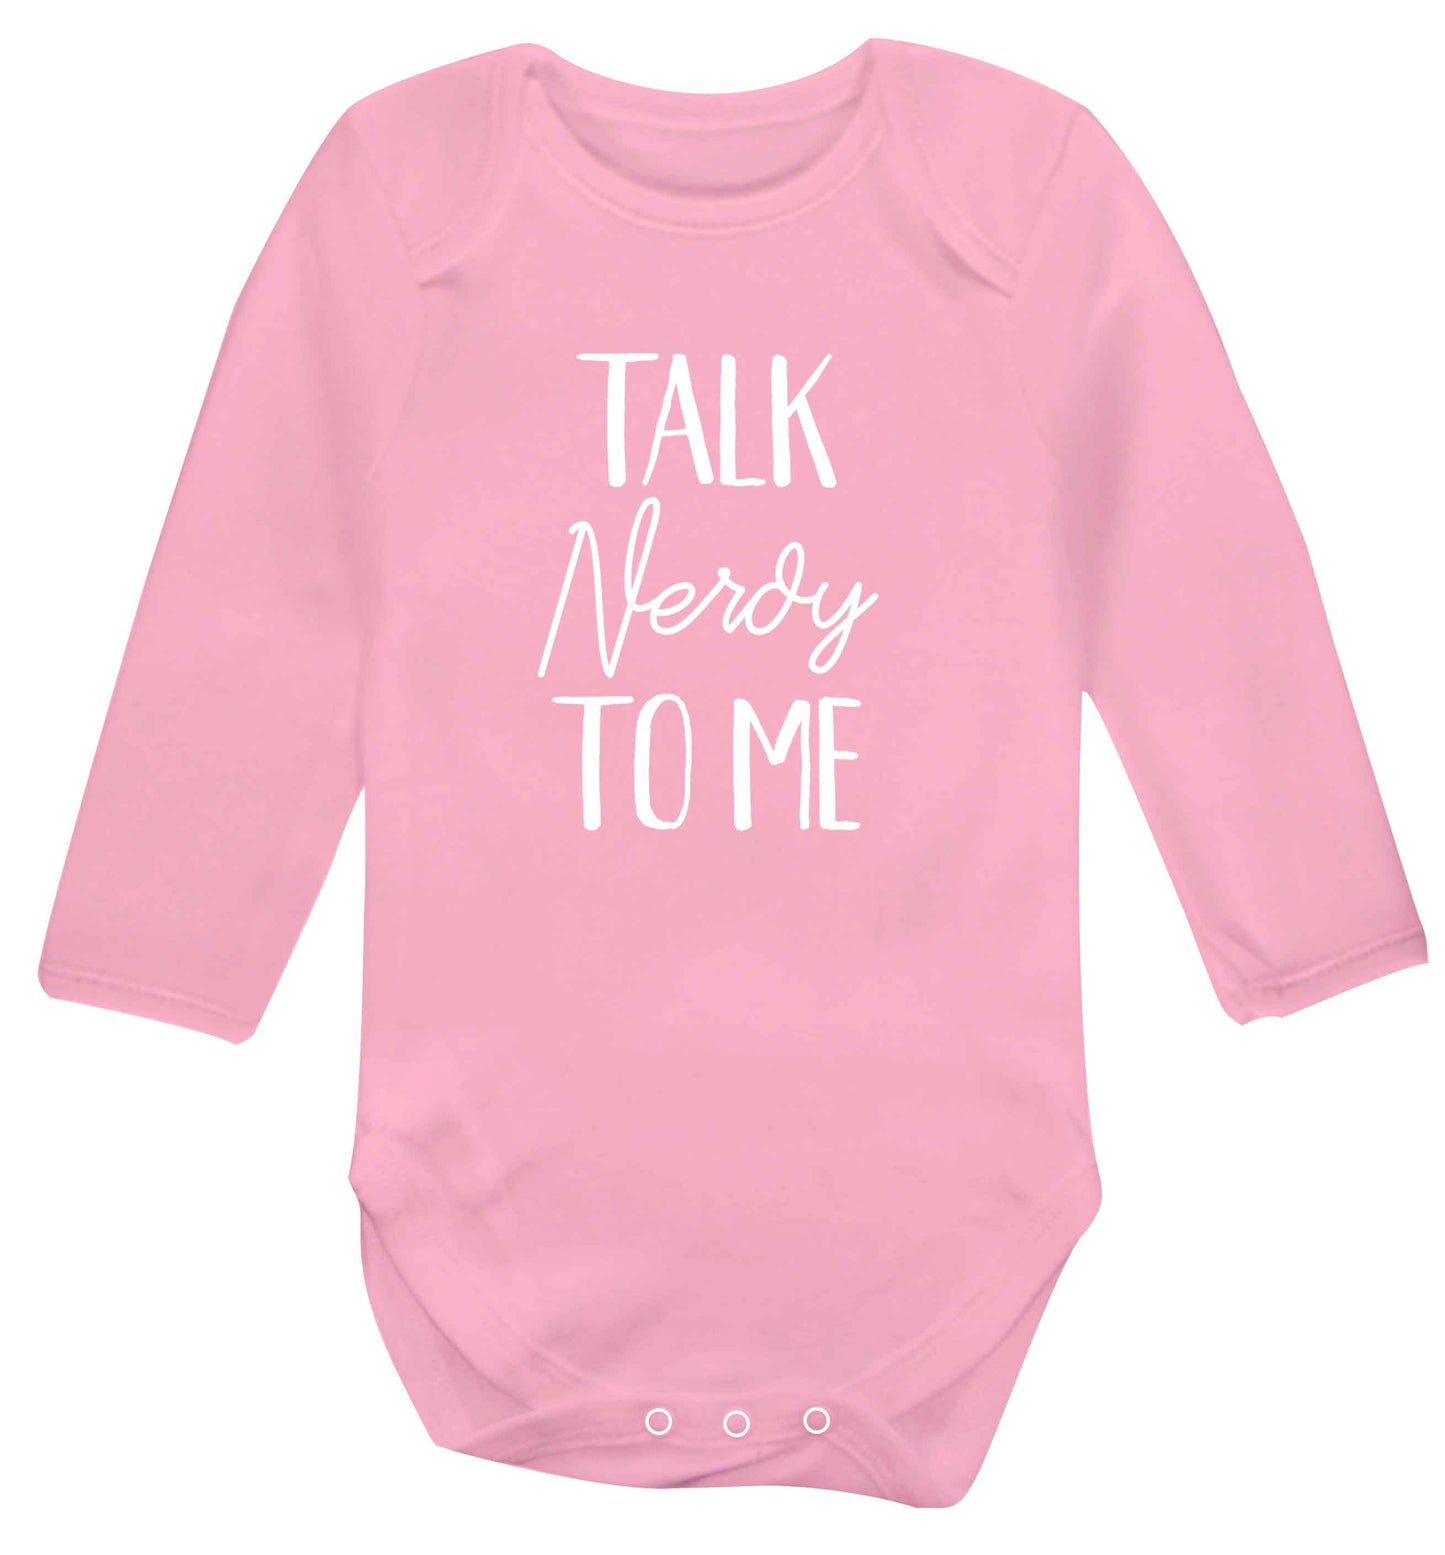 Talk nerdy to me baby vest long sleeved pale pink 6-12 months